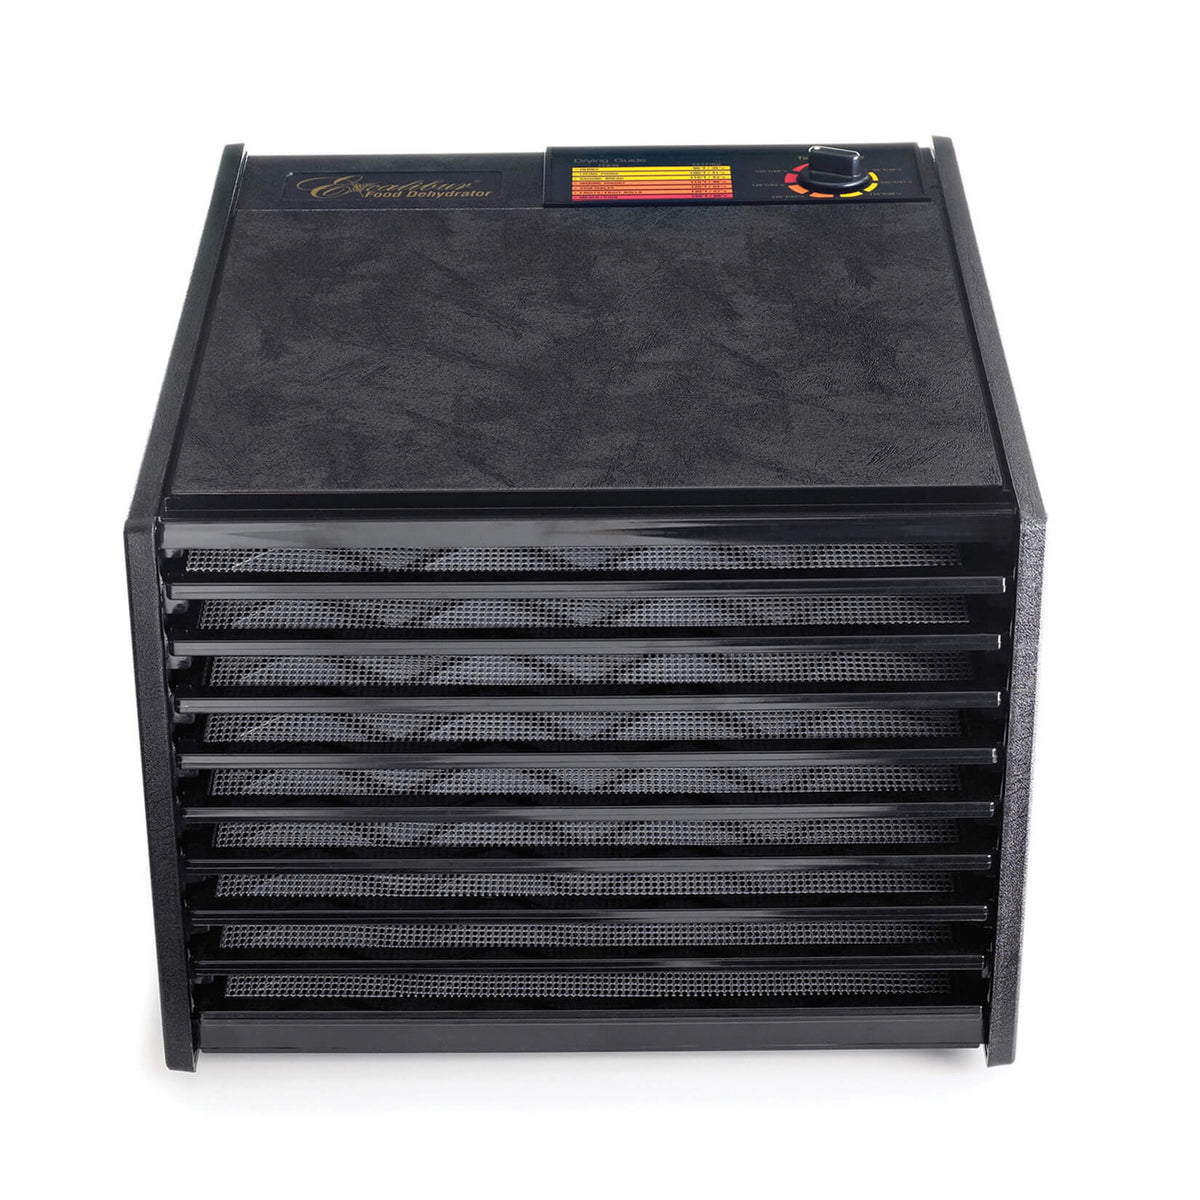 Excalibur 4900B 9 tray dehydrator front view with trays in.